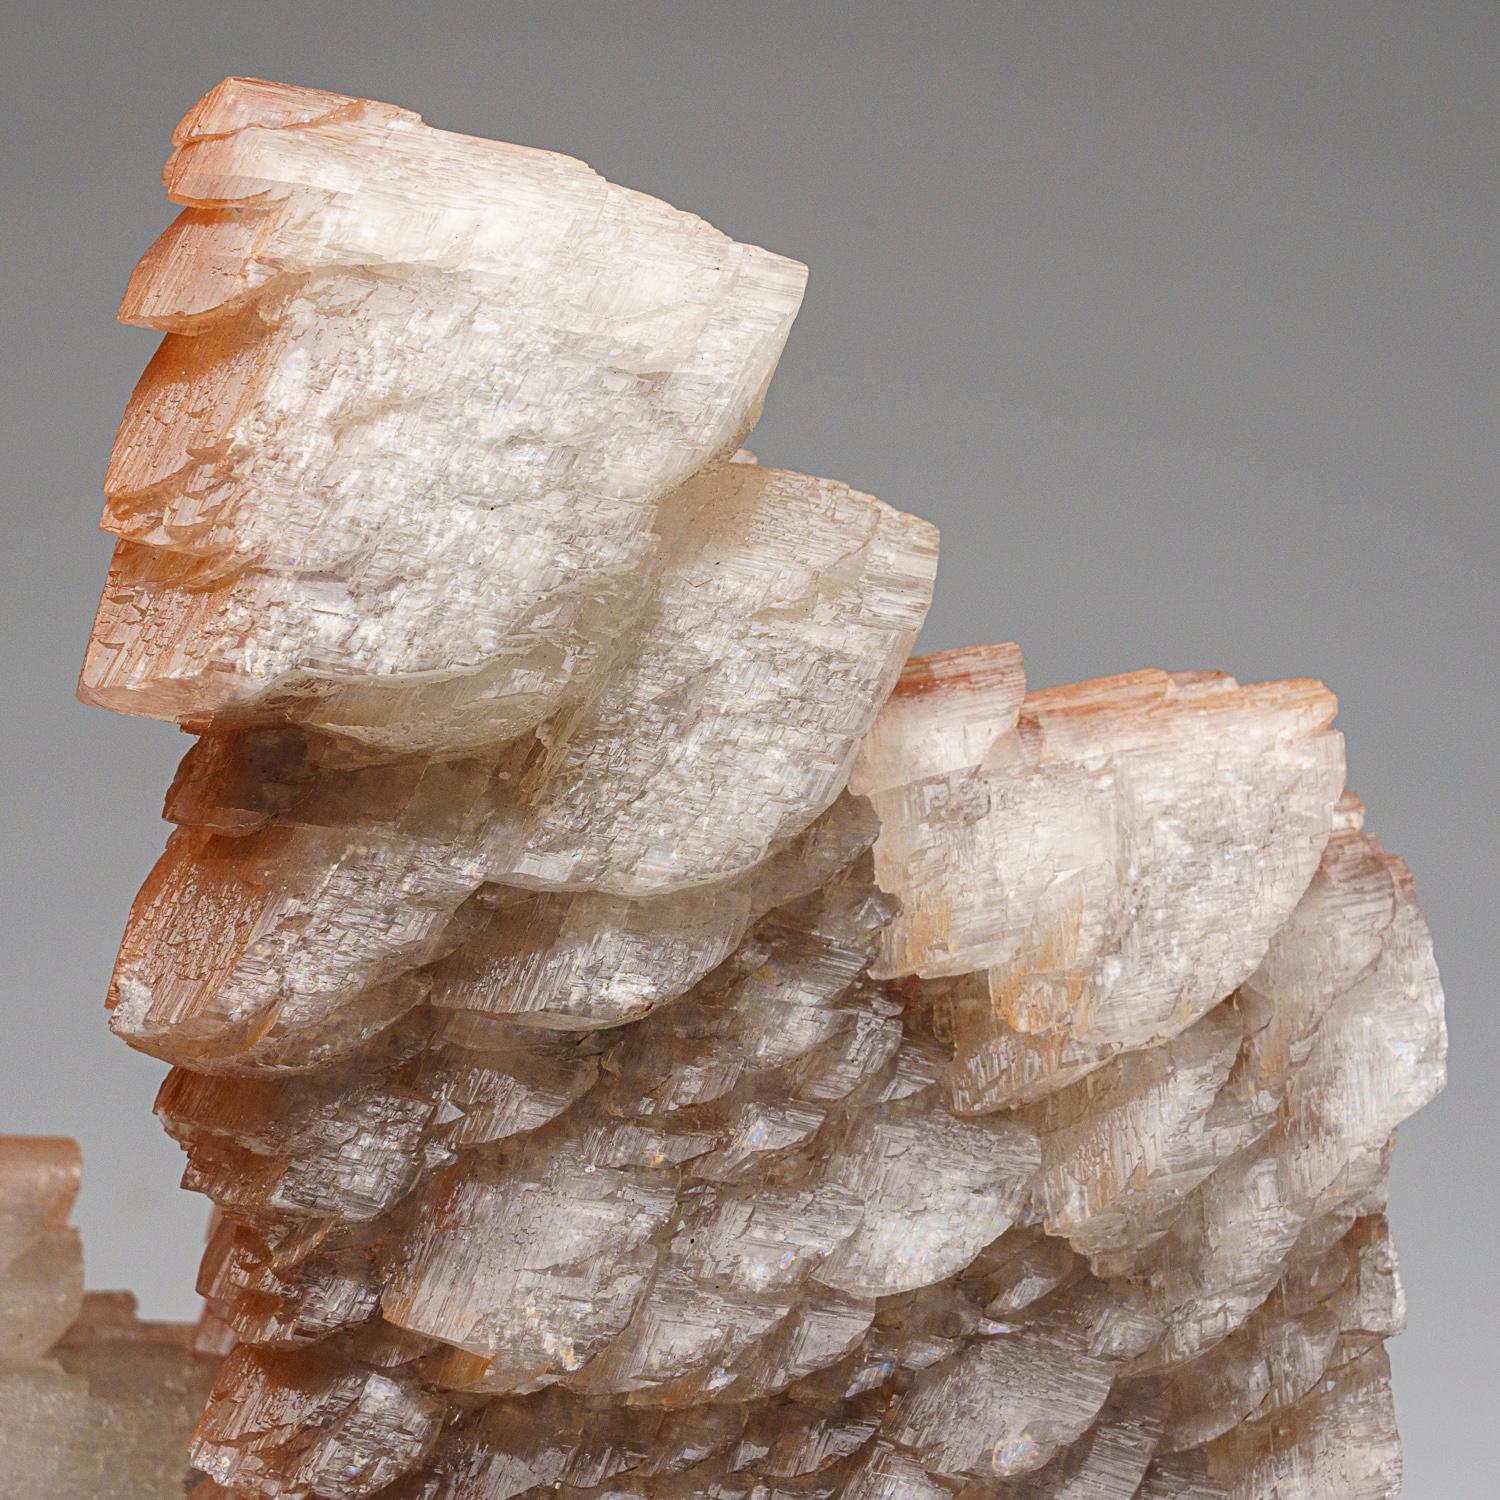 From Huanggang Mines, Hexigten Banner, Inner Mongolia A.R., China

Here is unique piece od two generations of calcite. Tthe first formed large scalenohedral calcite crystals with brown limonite on the surfaces, then was partially overgrown with